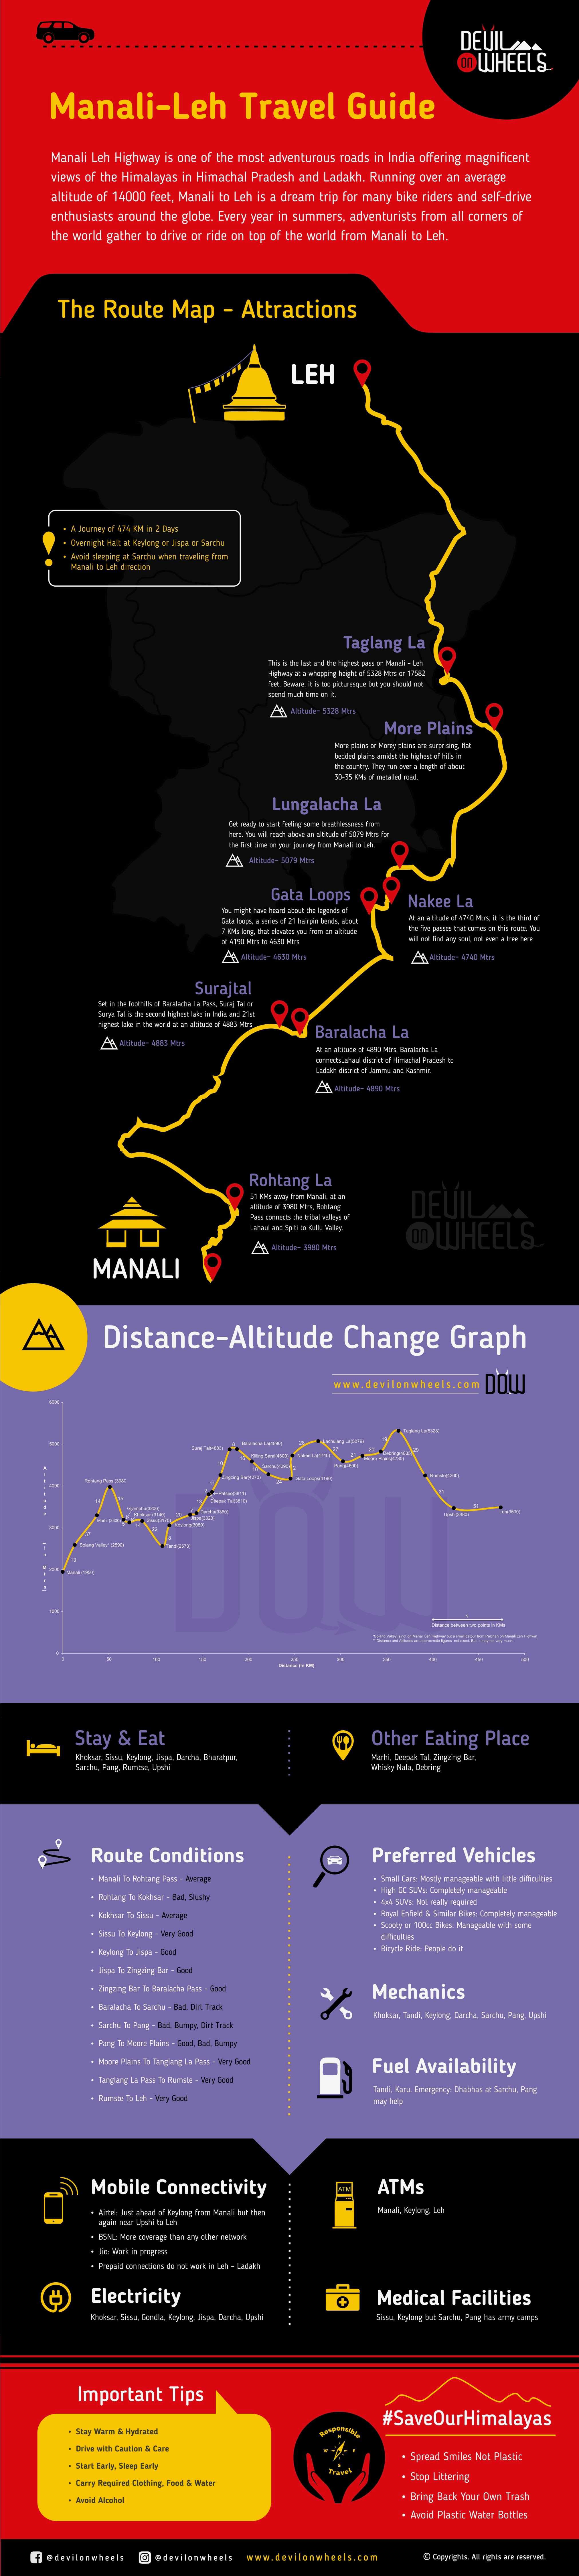 Manali Leh Highway Travel Guide - Detailed & Complete